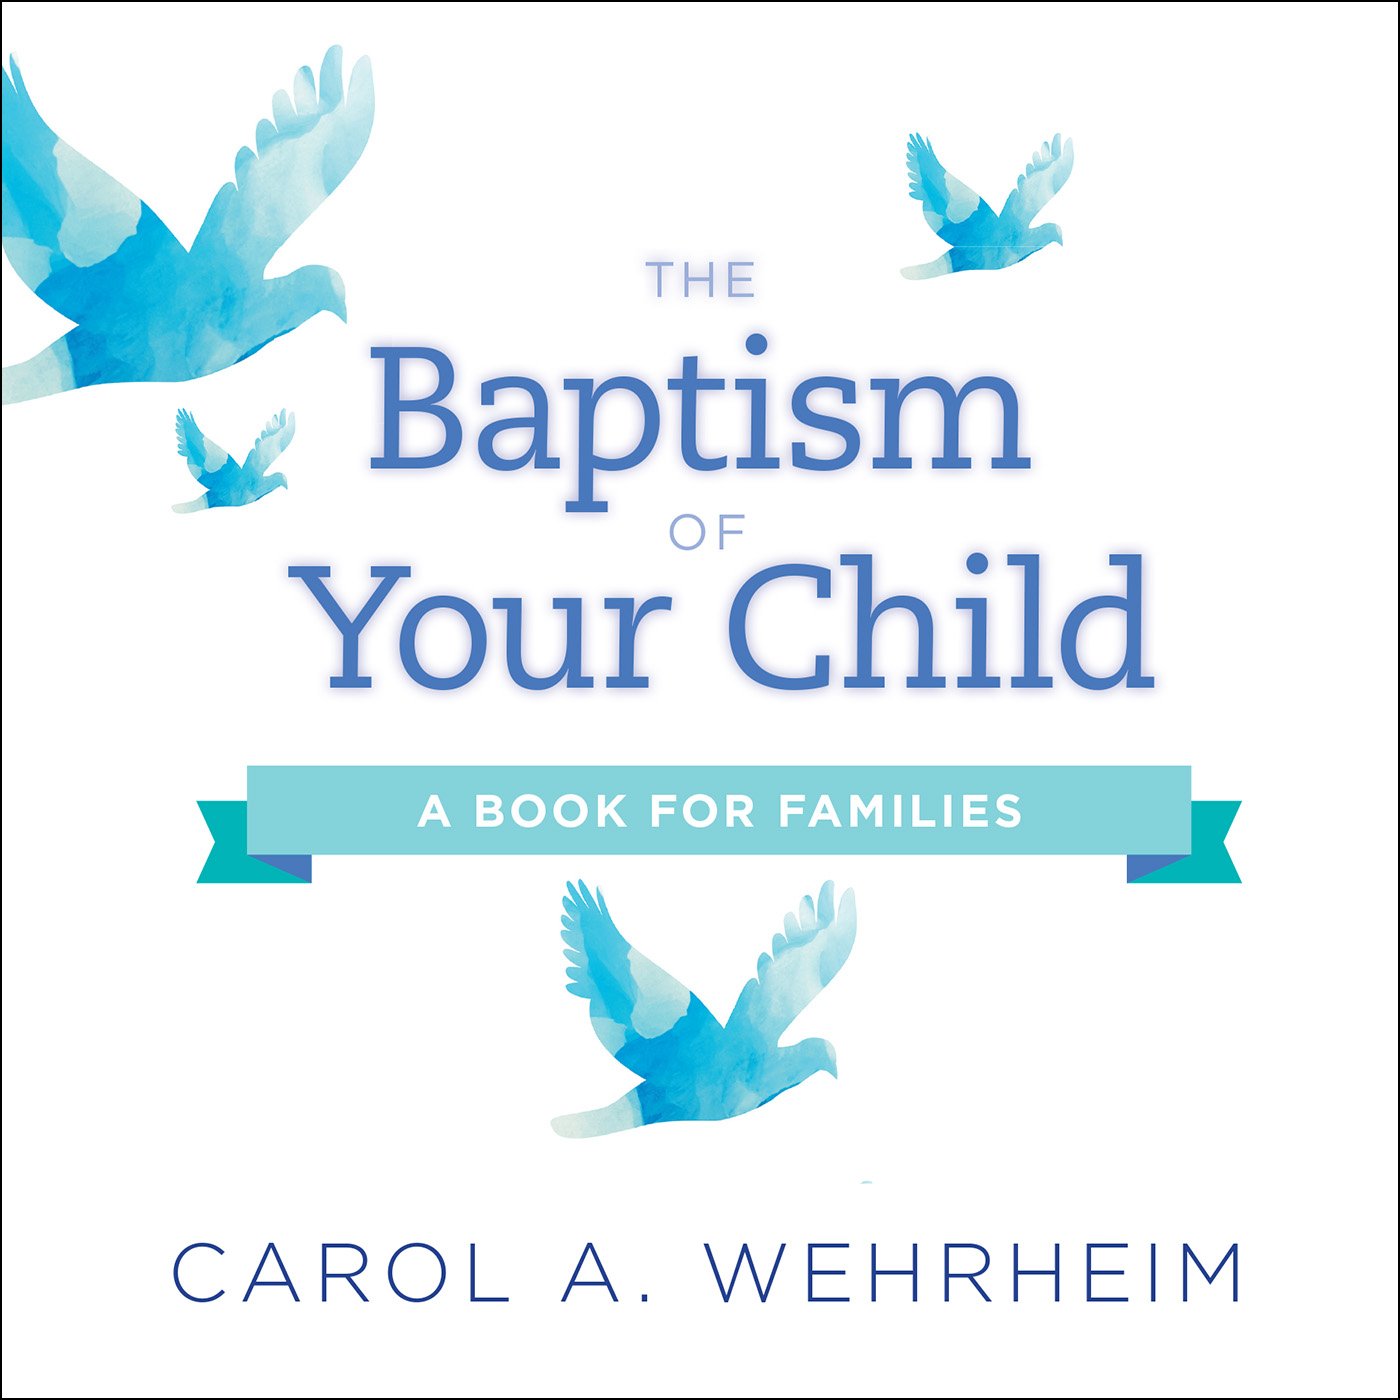 The Baptism of Your Child, Pack of 5